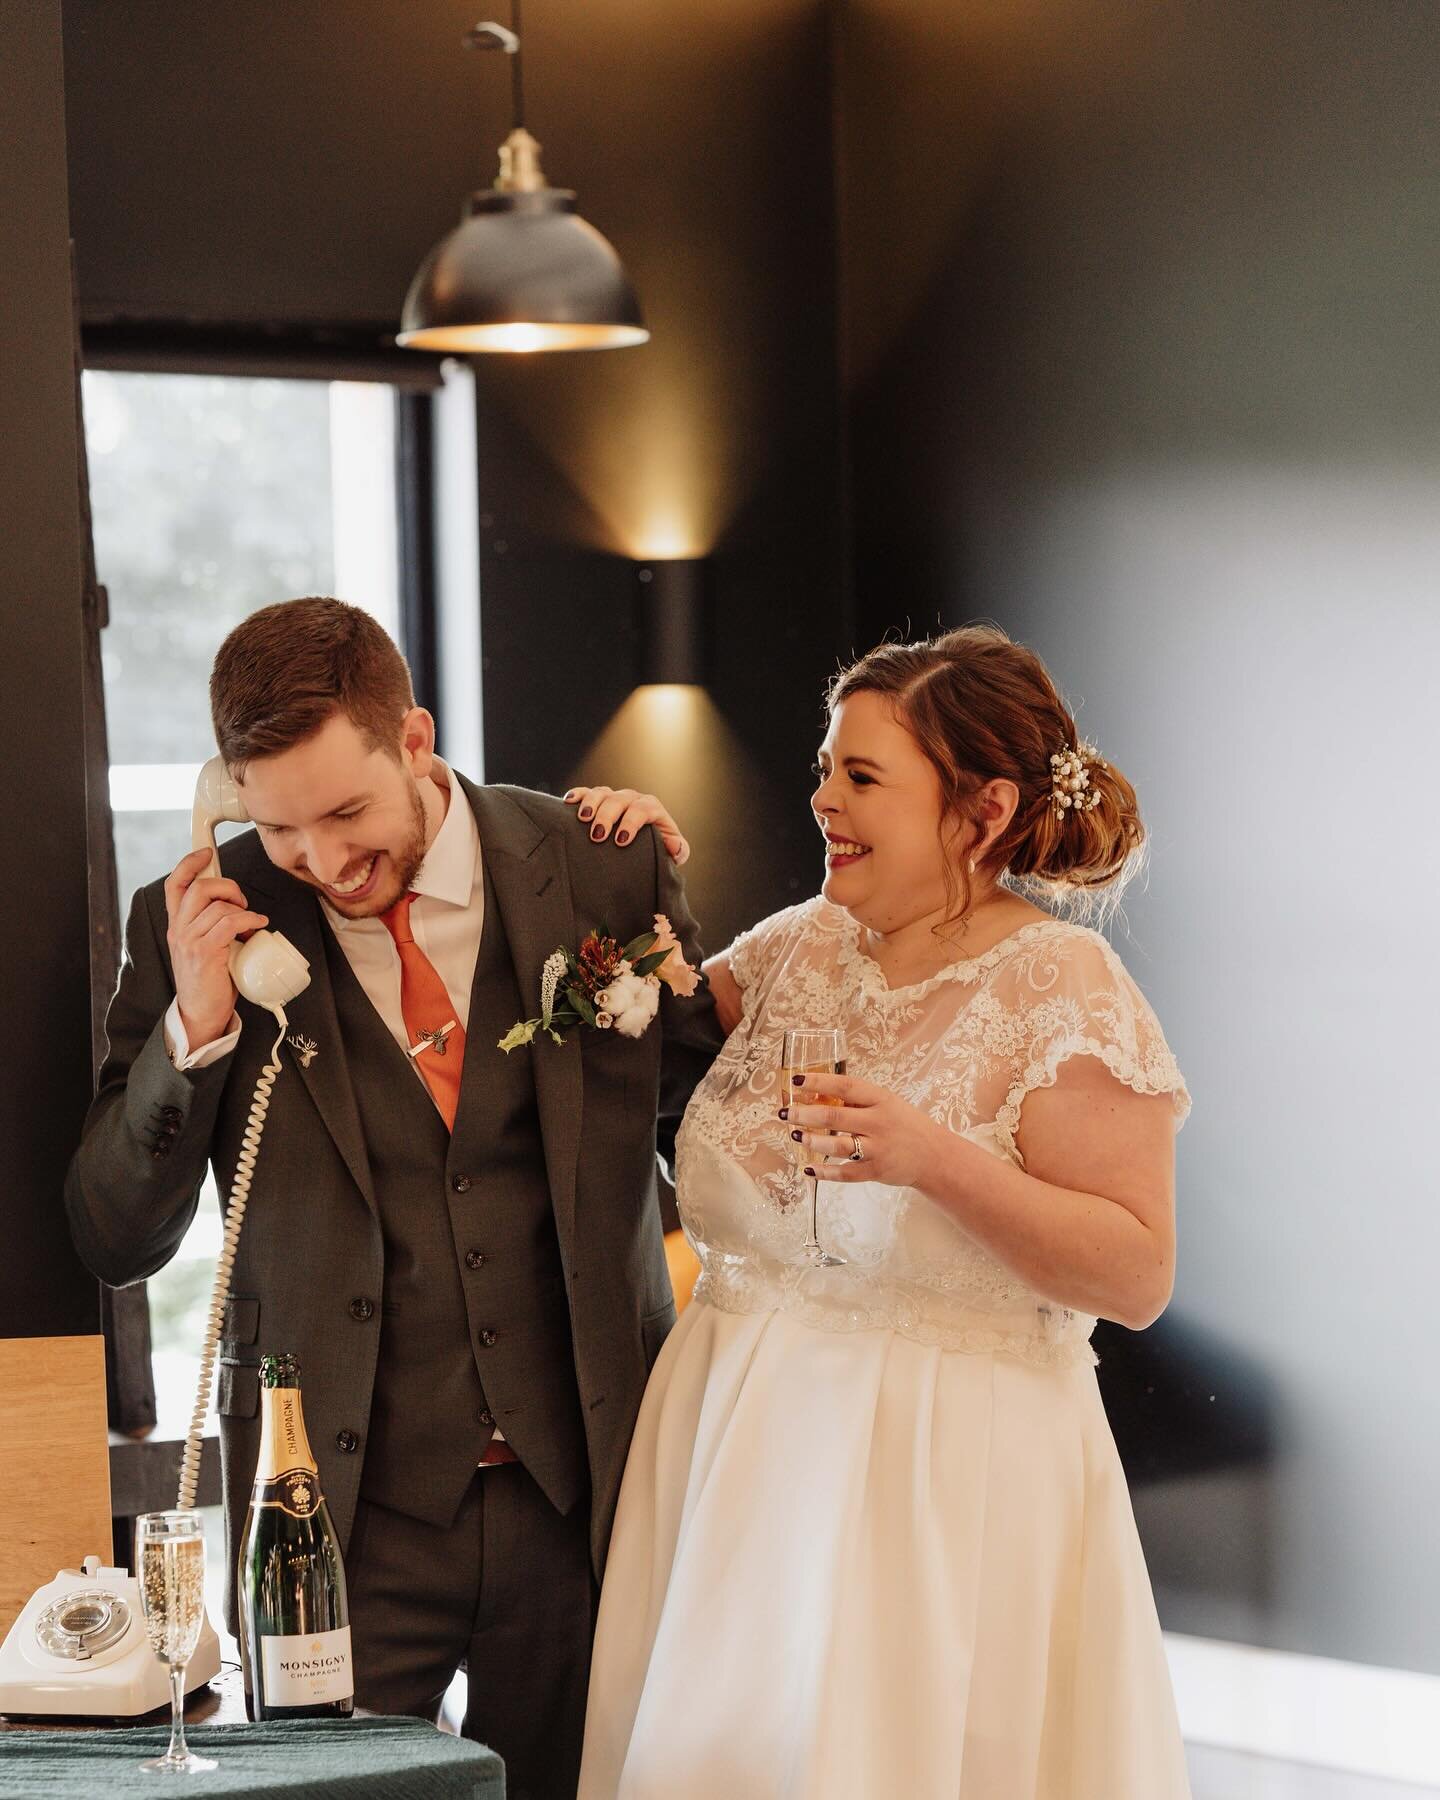 We were delighted that our vintage rotary telephones were selected for this Beauty In Sustainability photo shoot at @hothorpe 

Thank you @stevenbristowweddings for the shots 📸 

Other suppliers:

🍃Concept and planning: @shirleyraes
🍃Venue: @hotho